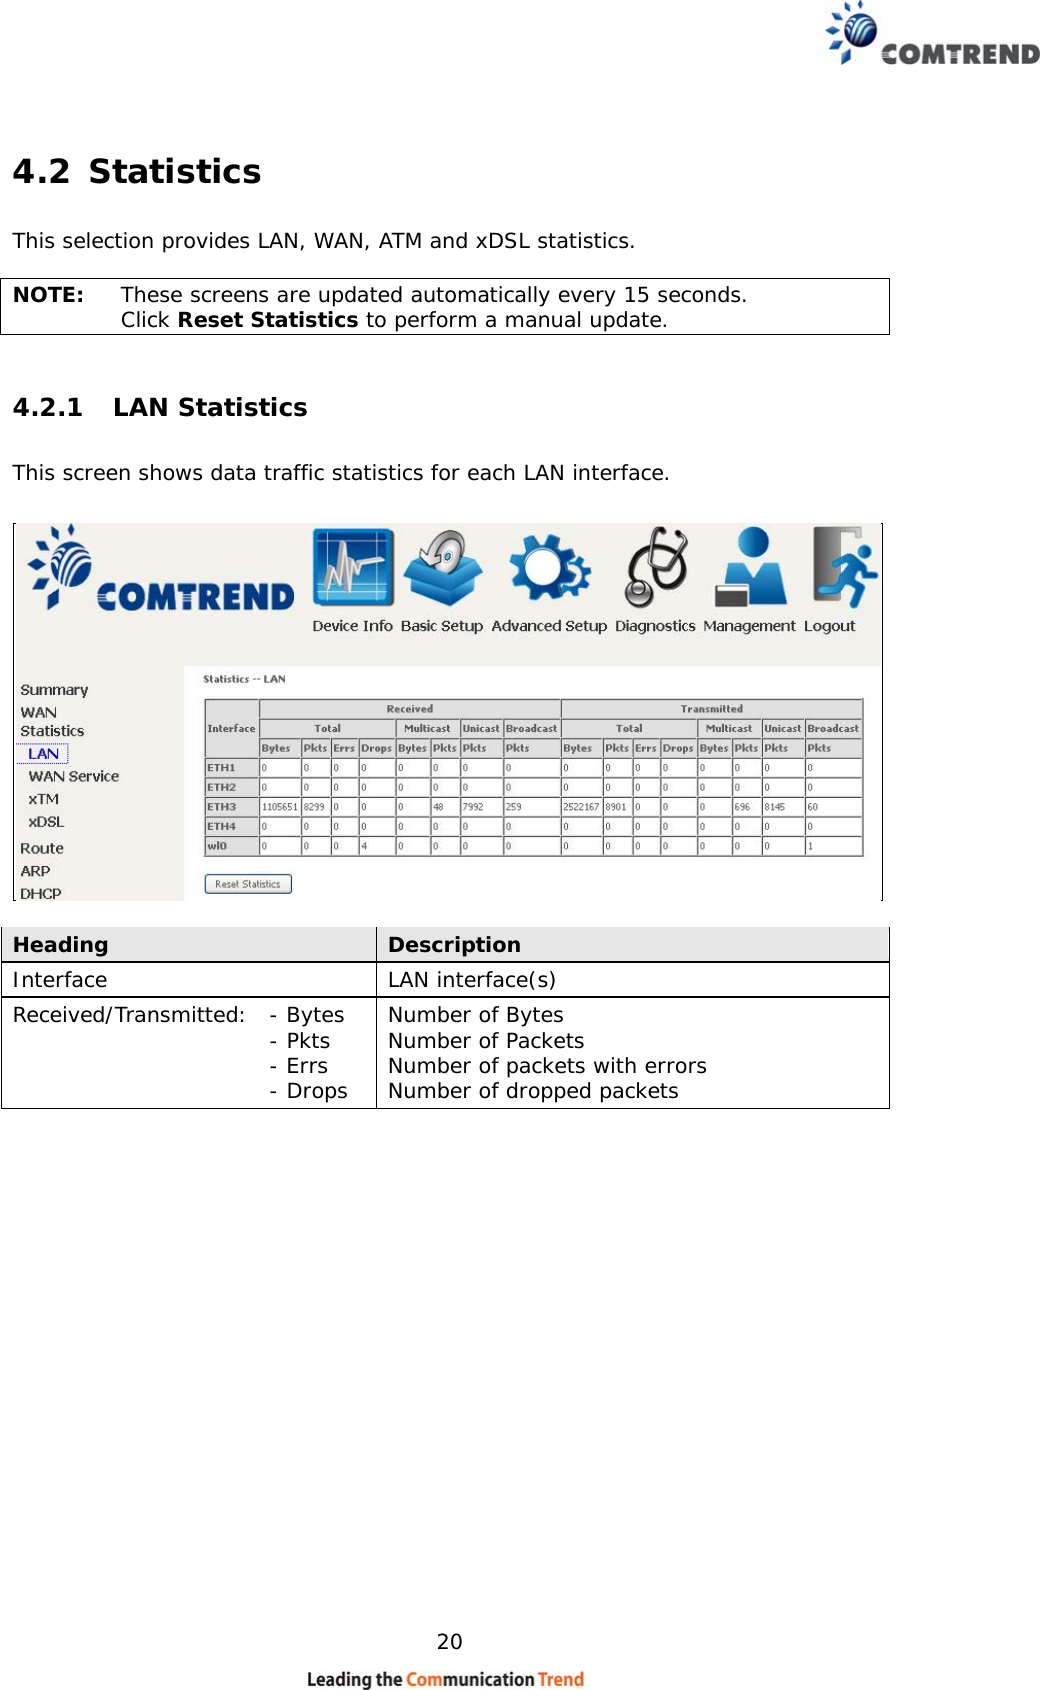    20 4.2 Statistics This selection provides LAN, WAN, ATM and xDSL statistics.  NOTE:  These screens are updated automatically every 15 seconds.  Click Reset Statistics to perform a manual update. 4.2.1 LAN Statistics This screen shows data traffic statistics for each LAN interface.    Heading  Description Interface  LAN interface(s) Received/Transmitted: - Bytes  - Pkts  - Errs  - Drops Number of Bytes  Number of Packets  Number of packets with errors Number of dropped packets     